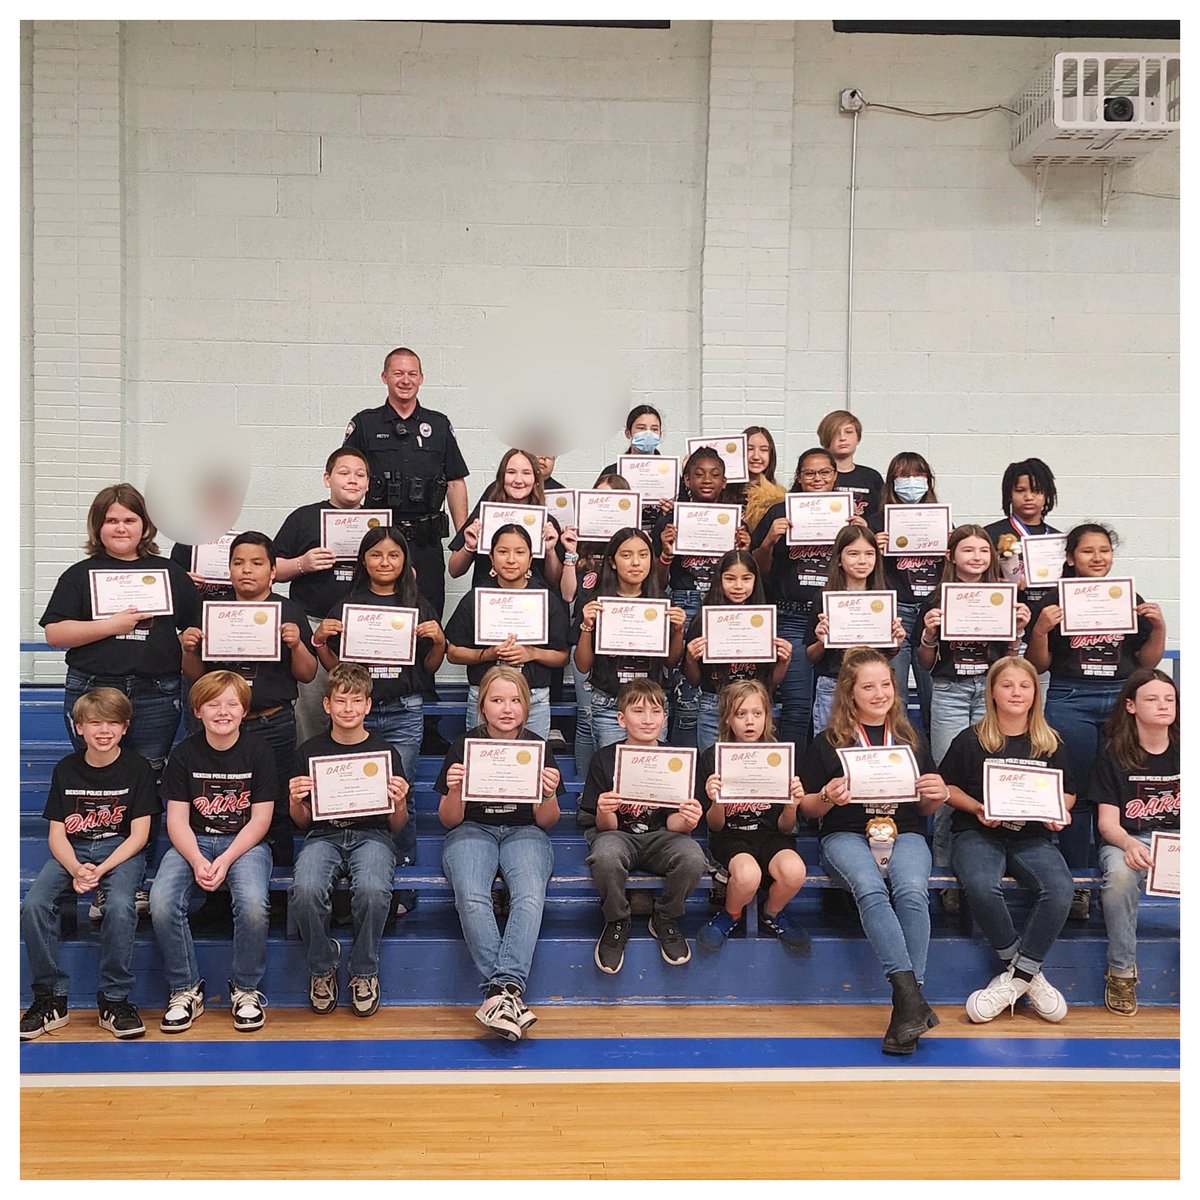 Thank you to the Dickson Co Police Dept and District Attorney’s Office for supporting out students and school. Big shout out to Officer Larson Petty, our SRO for making those connections, teaching students, and keeping safety first at DES! #thismatters #DARE @Desbears @DCS_TN